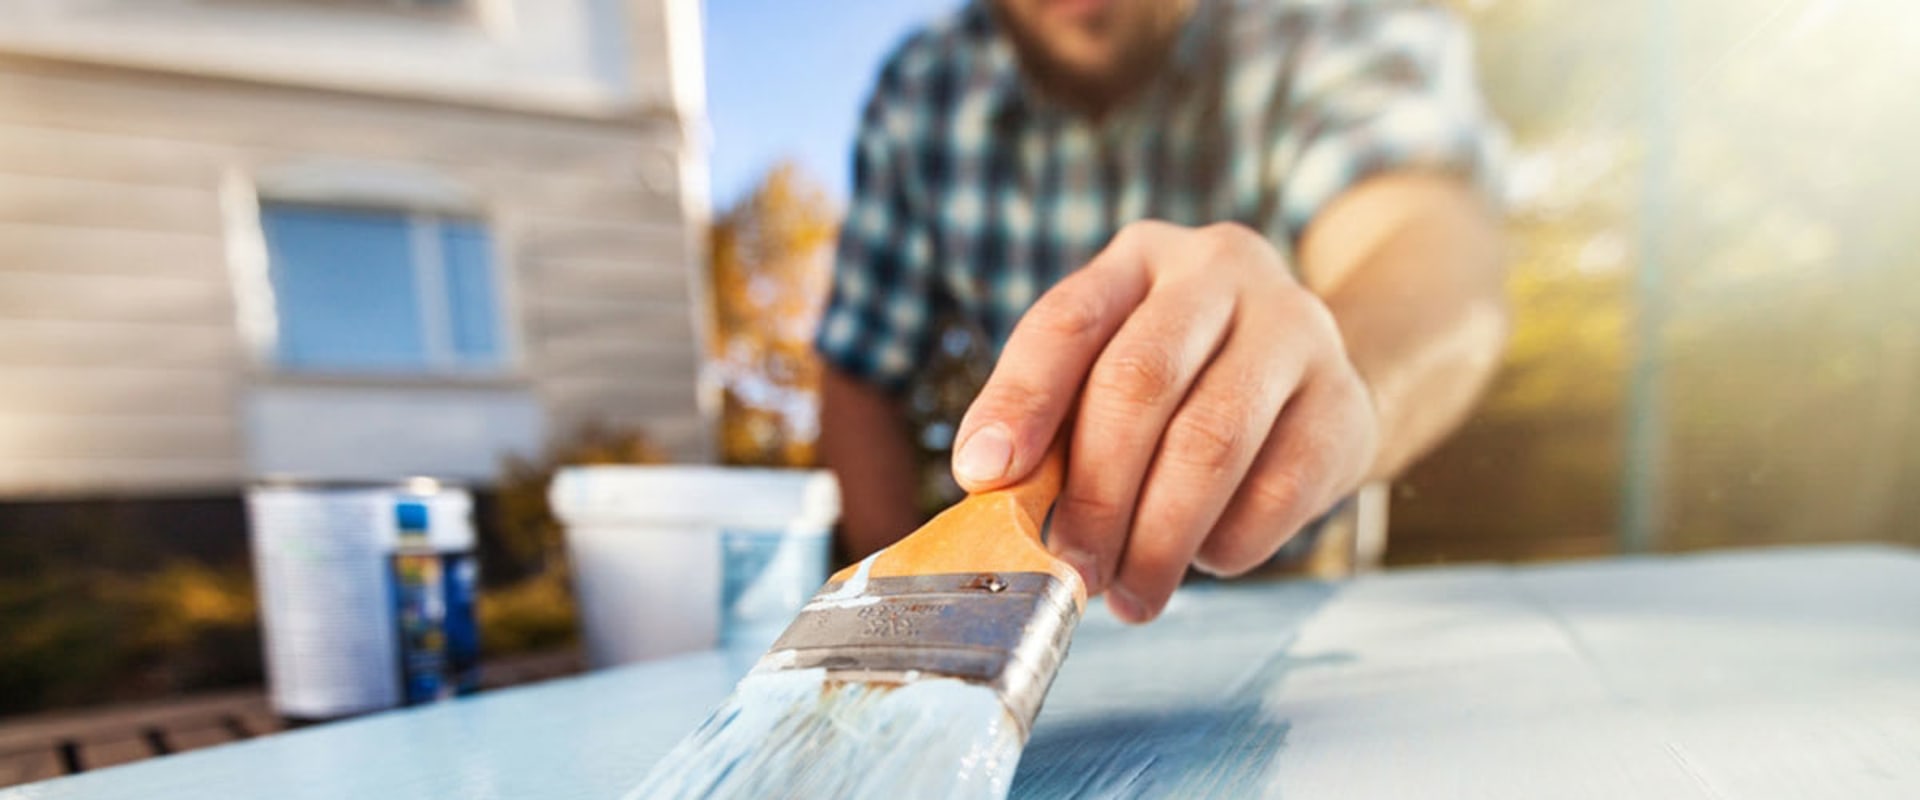 Finding Local Painting Companies Near You